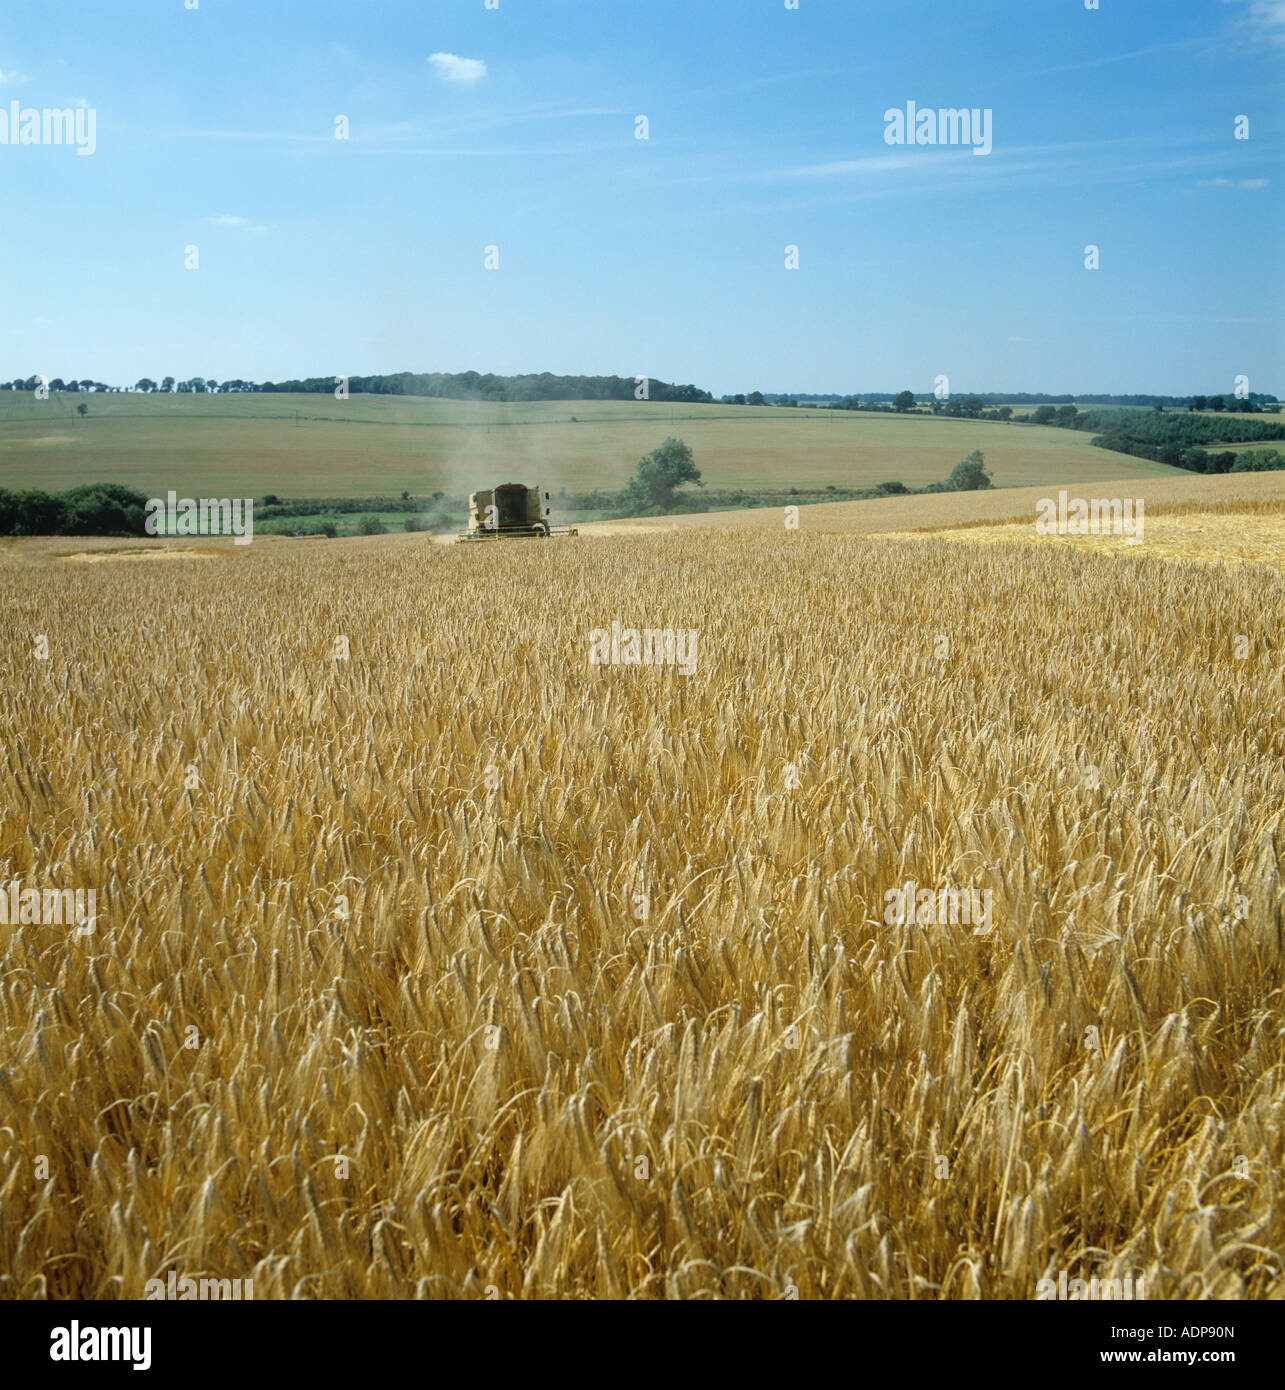 New Holland combine harvesting a dusty field of ripe barley Wiltshire Stock Photo